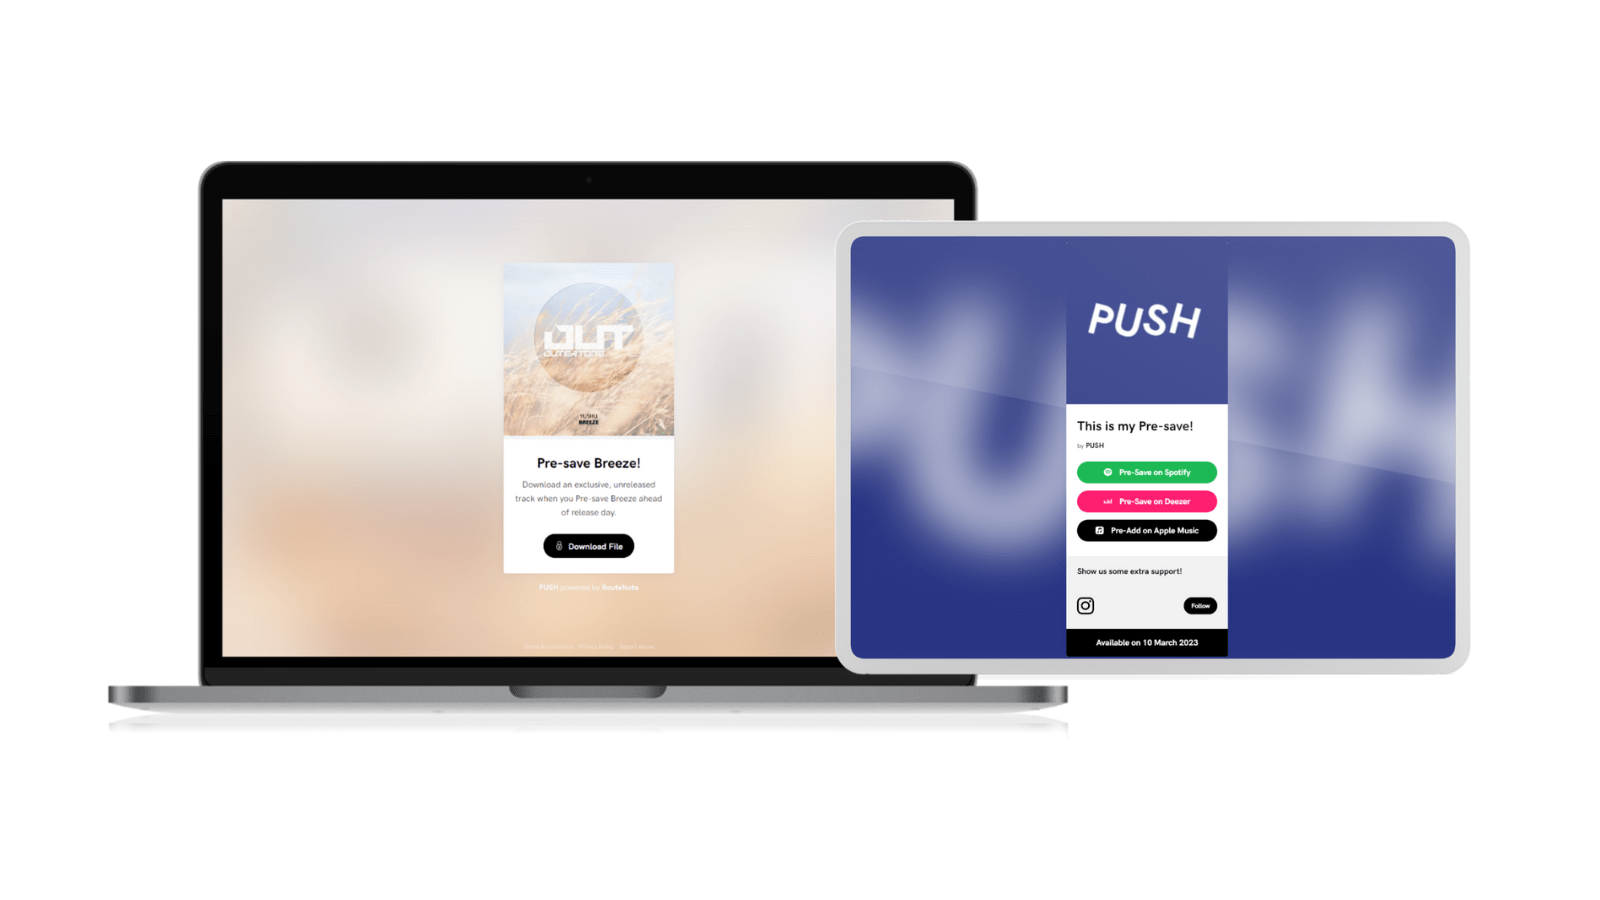 PUSH.fm – Pre-saves: Promote your music ahead of release day for free